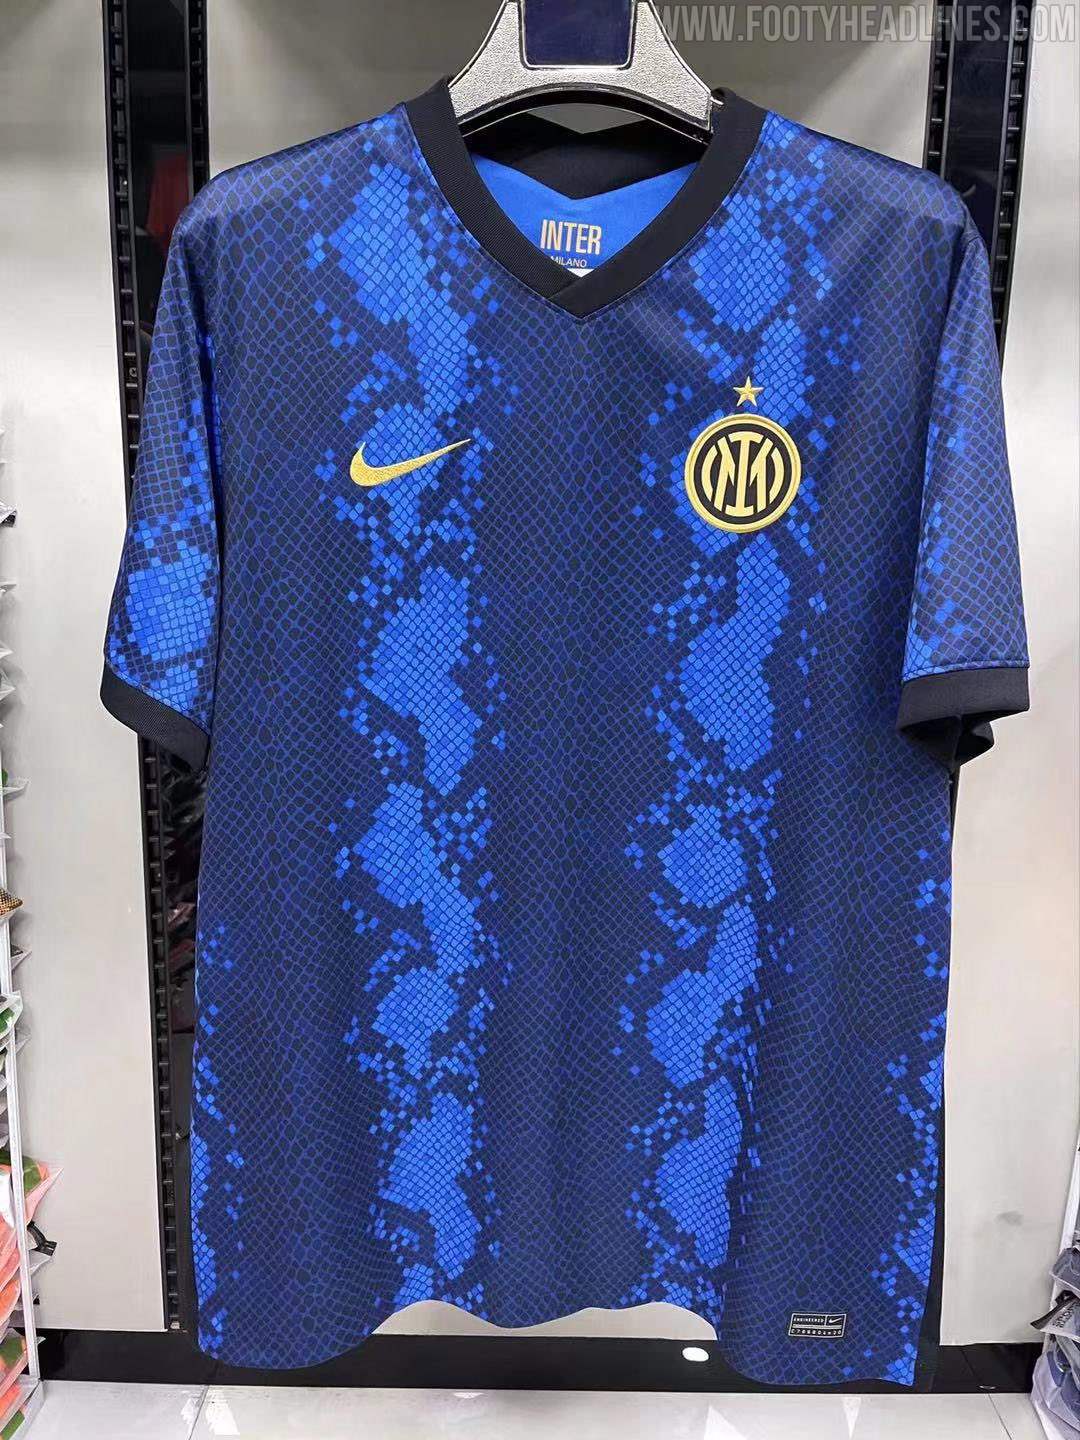 Confirmed: Nike Inter Milan 21 22 Home Kit Leaked New Picture